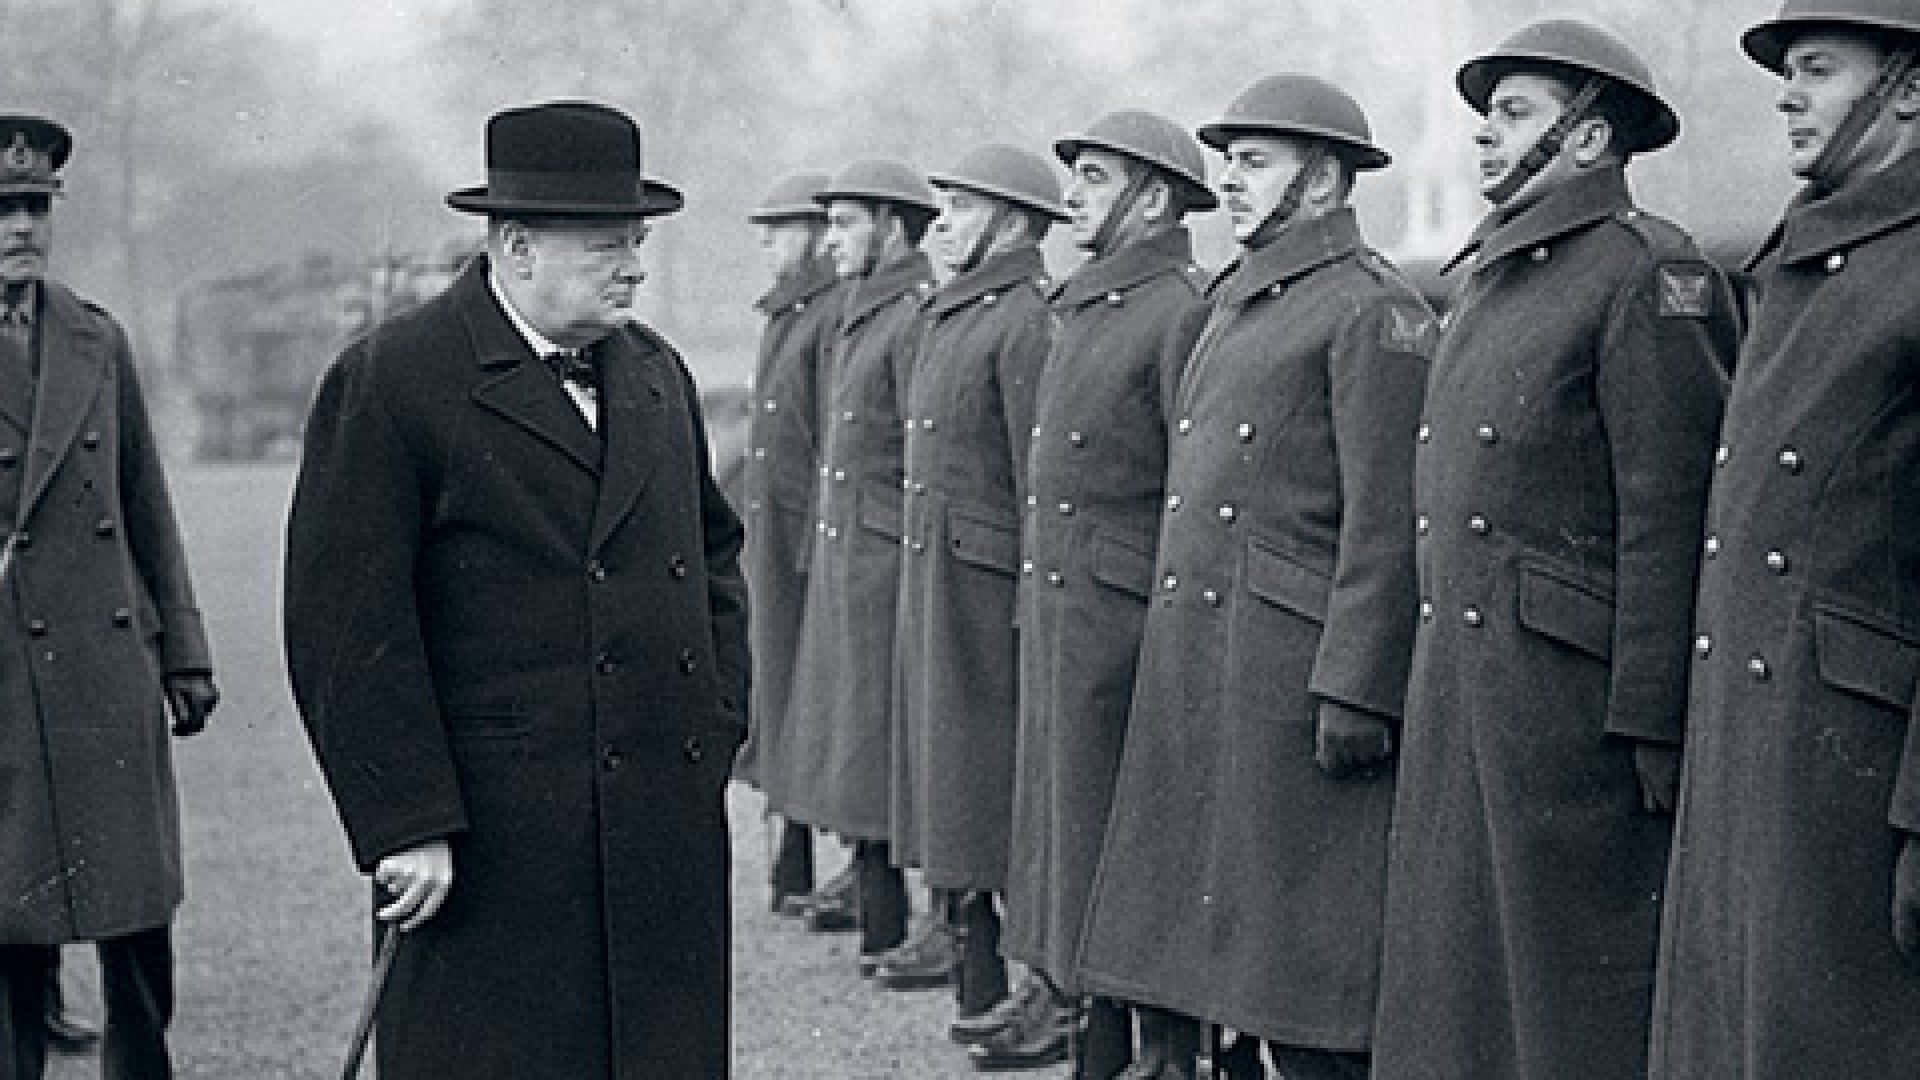 A Man In A Hat And Coat Standing In Front Of A Group Of Men